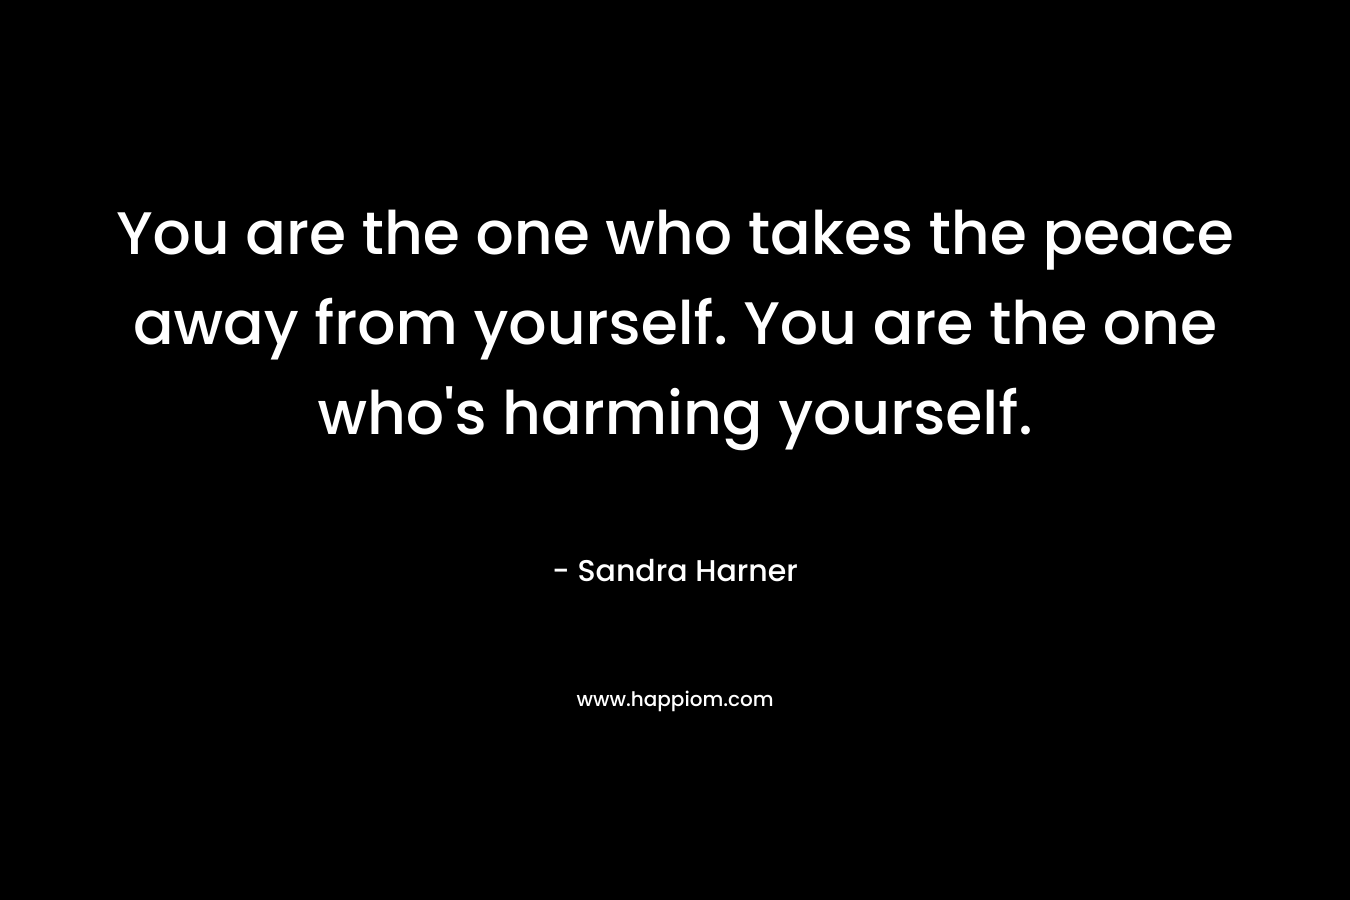 You are the one who takes the peace away from yourself. You are the one who’s harming yourself. – Sandra Harner